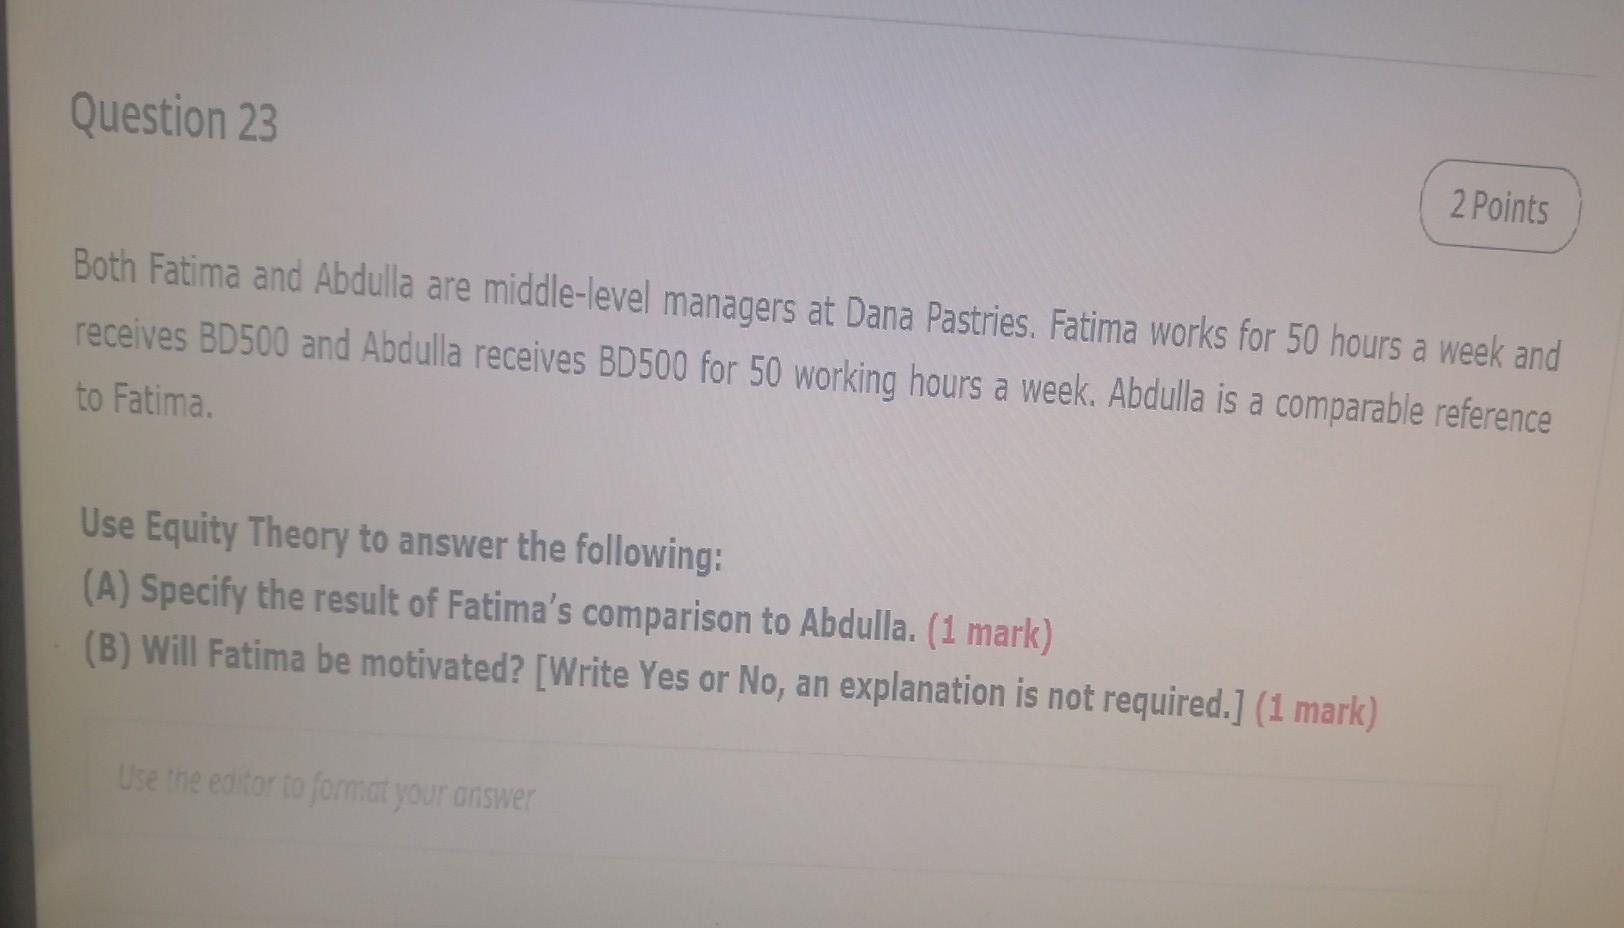 Question 23
2 Points
Both Fatima and Abdulla are middle-level managers at Dana Pastries. Fatima works for 50 hours a week and